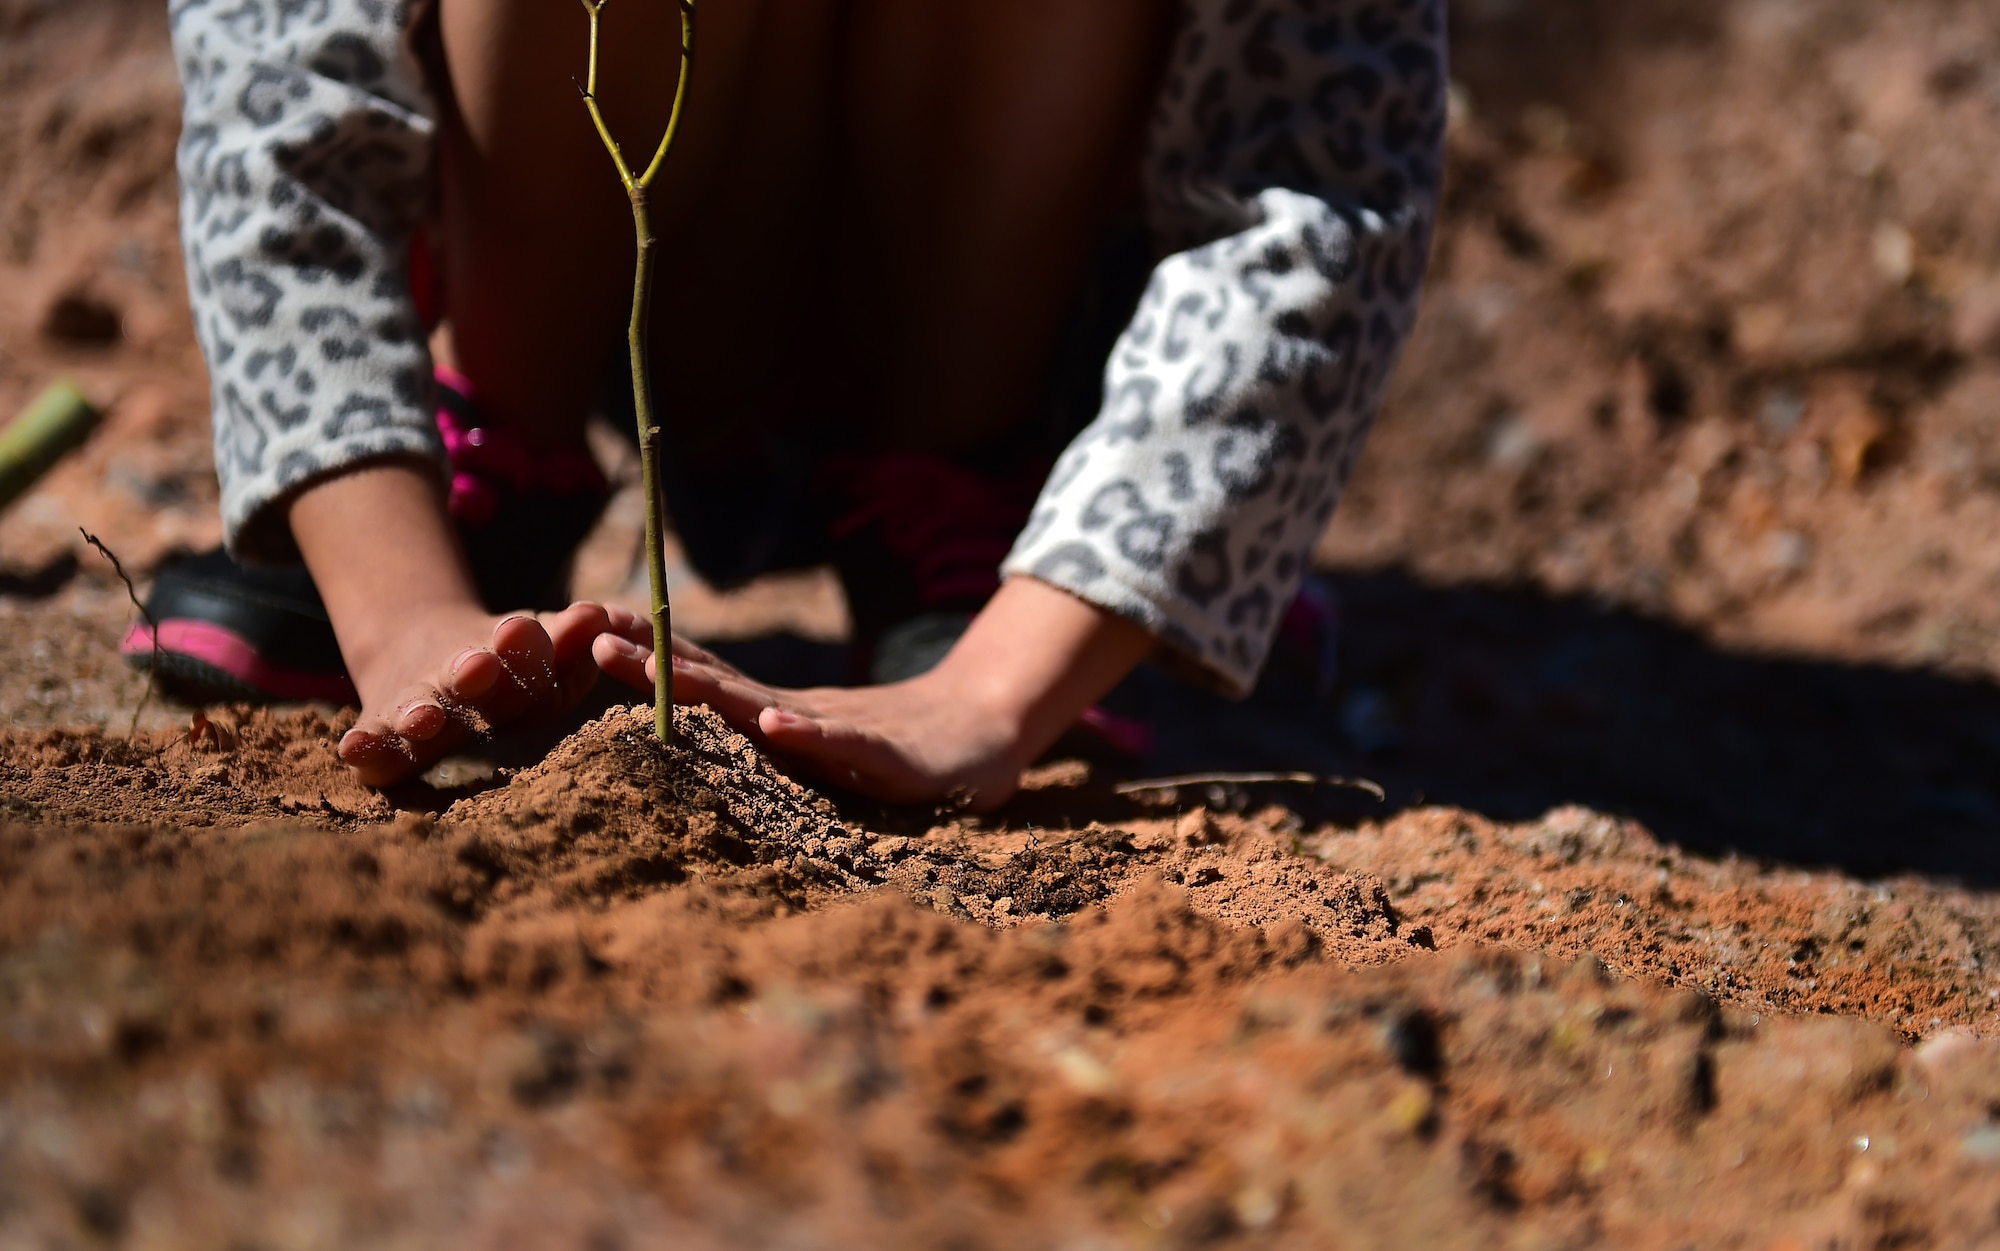 Emma Aragona, second-grade student from Ramstein Elementary School, plants a tree in honor of Earth Day April 22, 2015, at Ramstein Air Base, Germany.  Aragona’s entire class planted more than 100 trees on Ramstein as part of Earth Day 2015. The official focus of this year’s Earth Day was recycling. For more tips on reducing your ecological footprint, visit www.earthday.org, or contact the 86th Civil Engineering Squadron Facility Management Flight at 06371-47-7279. (U.S. Air Force photo/Staff Sgt. Sara Keller)
